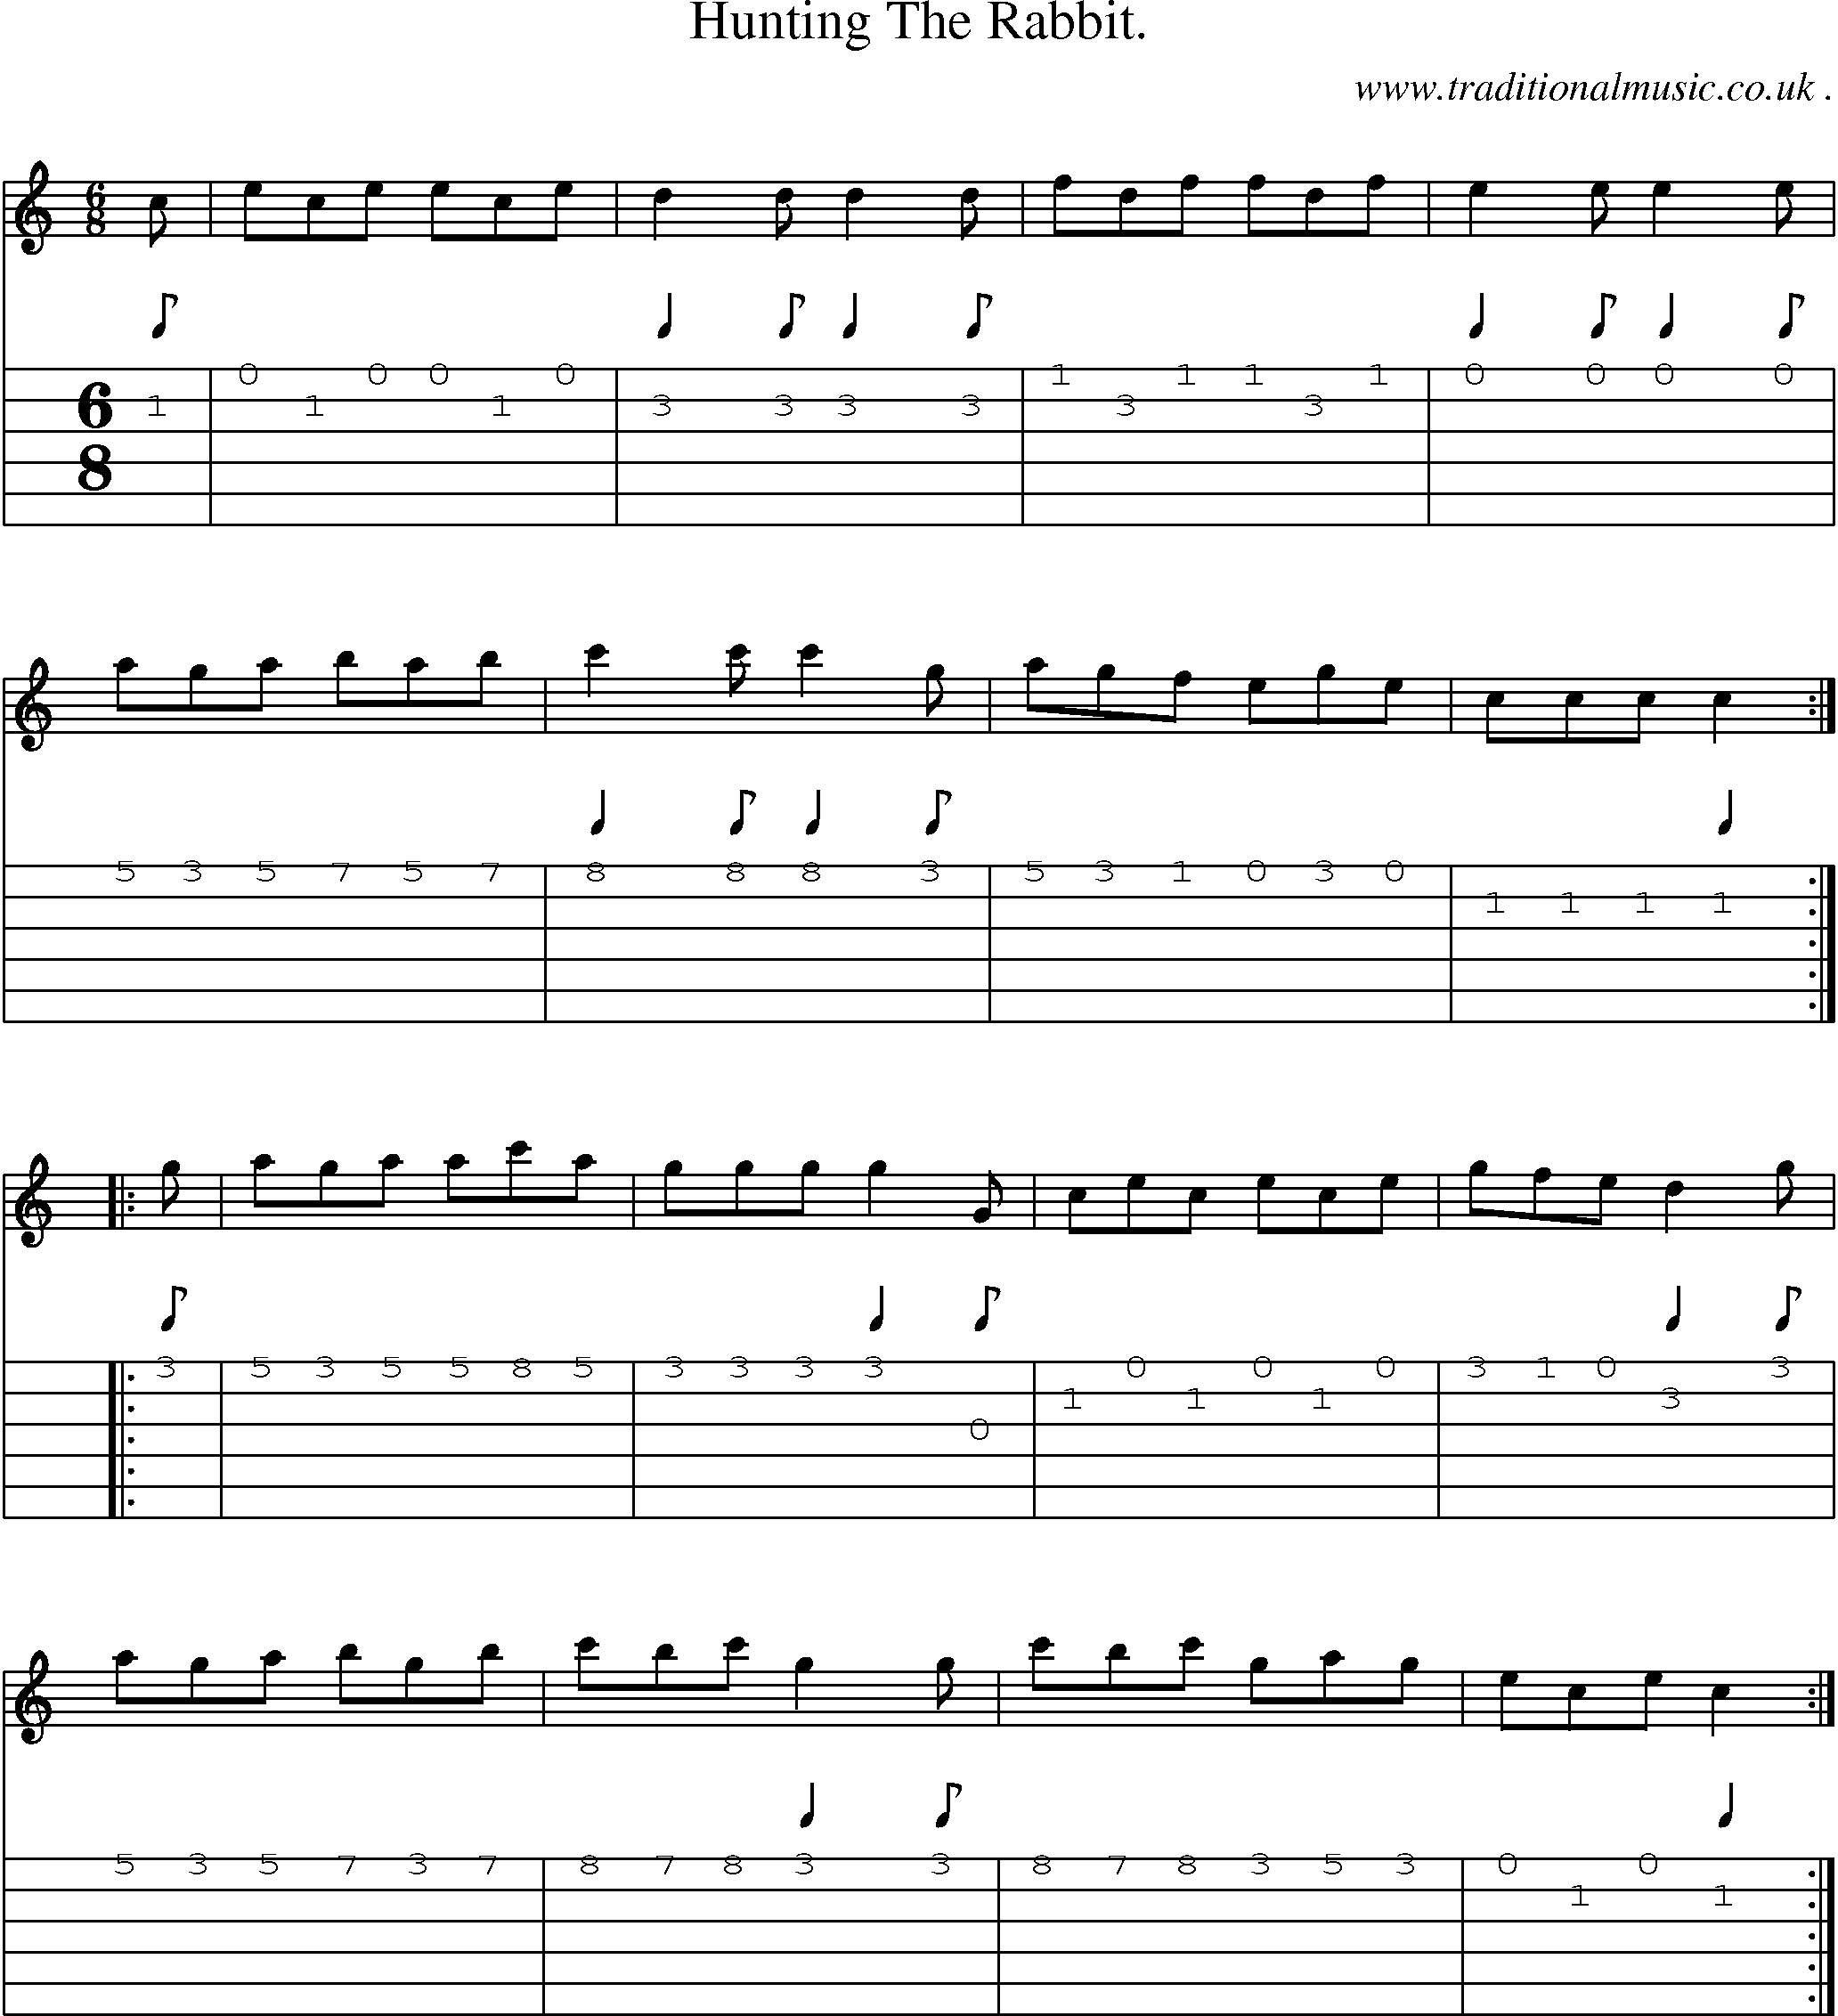 Sheet-Music and Guitar Tabs for Hunting The Rabbit